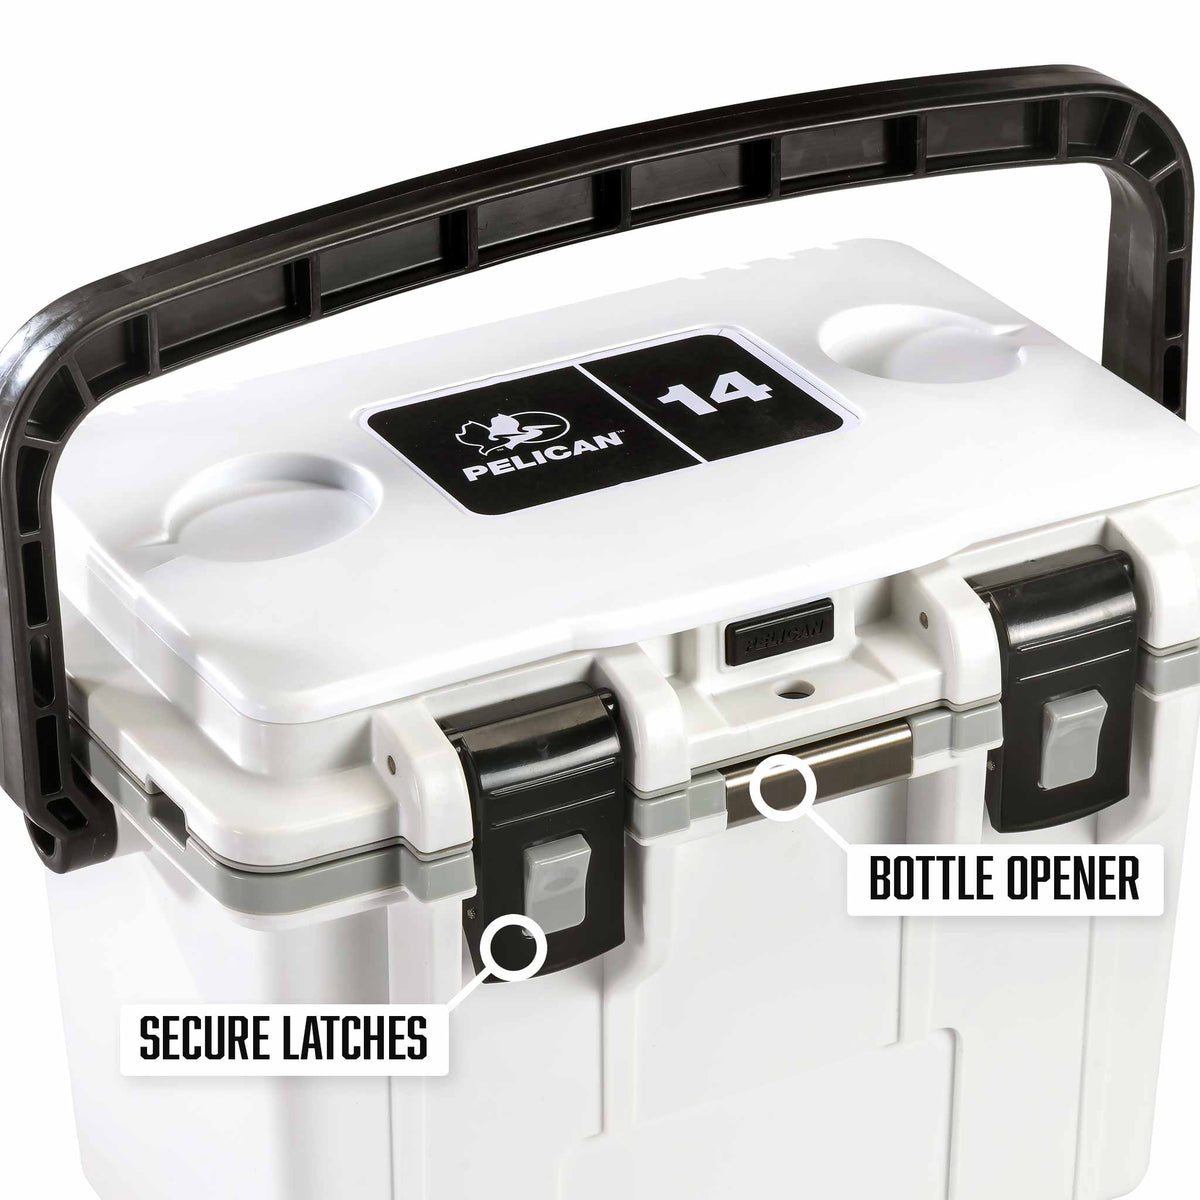 14QT Personal Pelican Cooler has secure latches and a built-in bottle opener